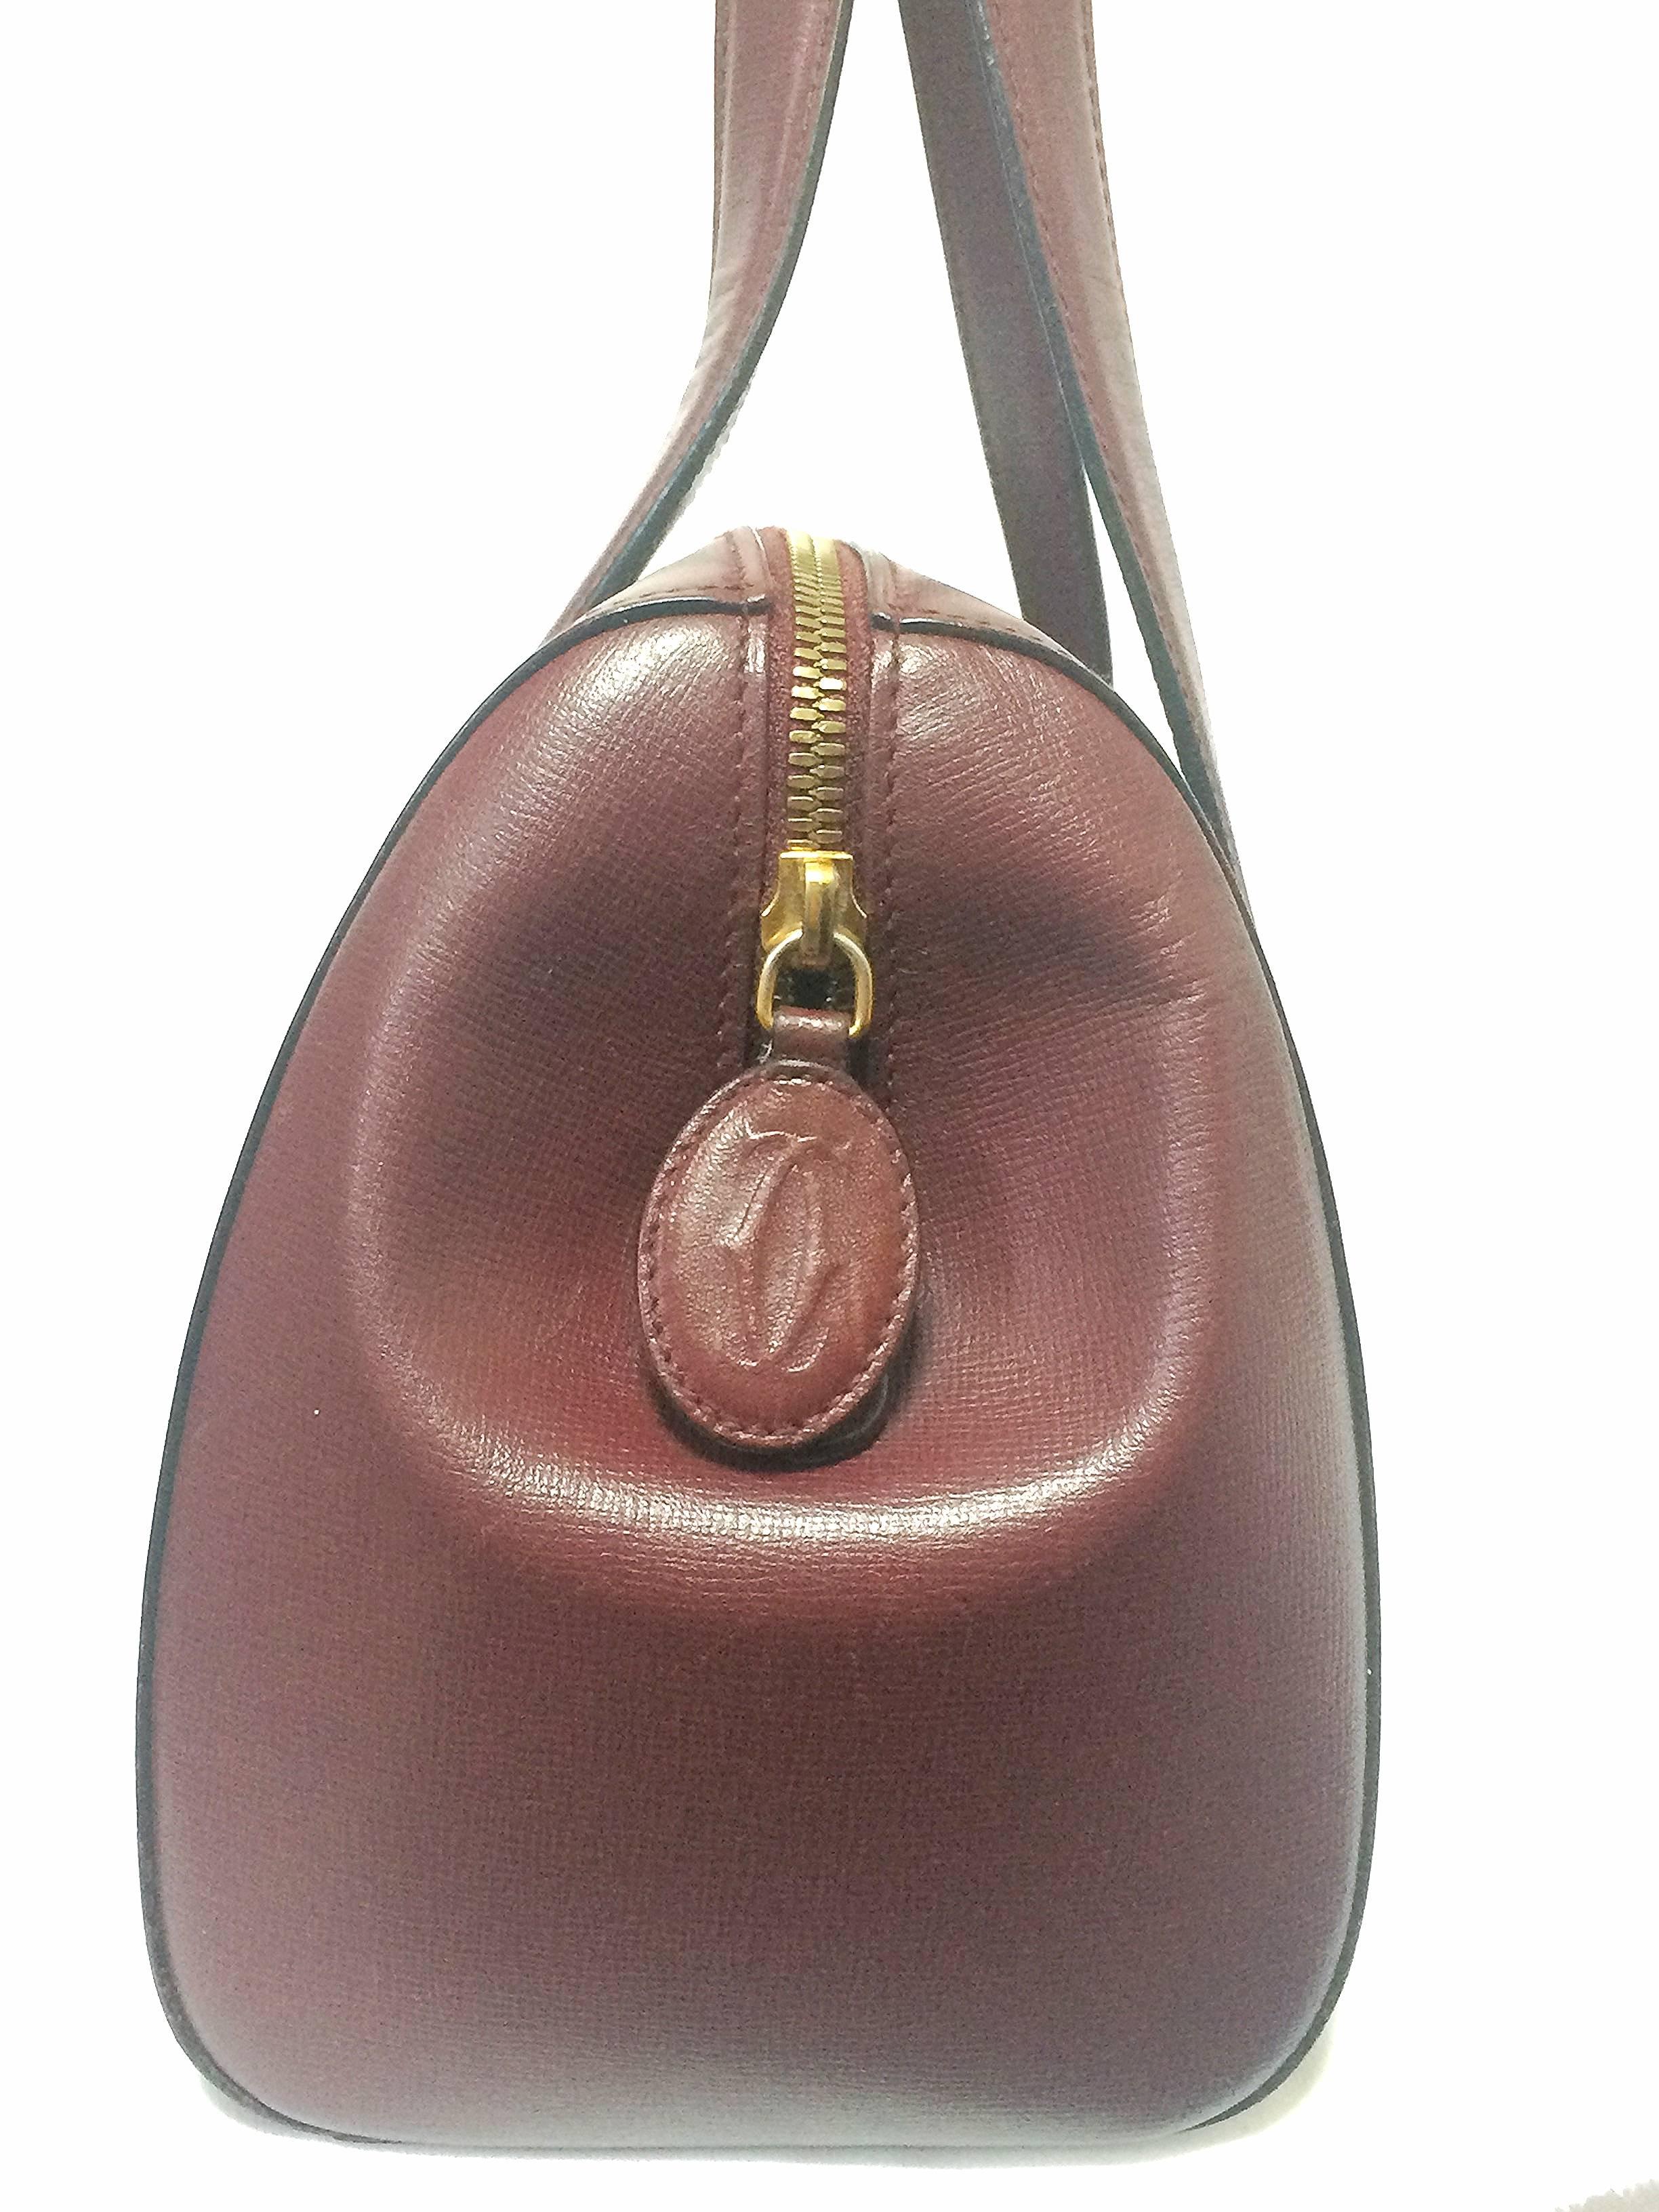 1990s. Vintage Cartier classic wine, bordeaux leather handbag purse in unique shape with bullet design gold hardware at handles. Must de Cartier.

Introducing another vintage masterpiece from Cartier, wine leather purse. 
Has the logo embossed